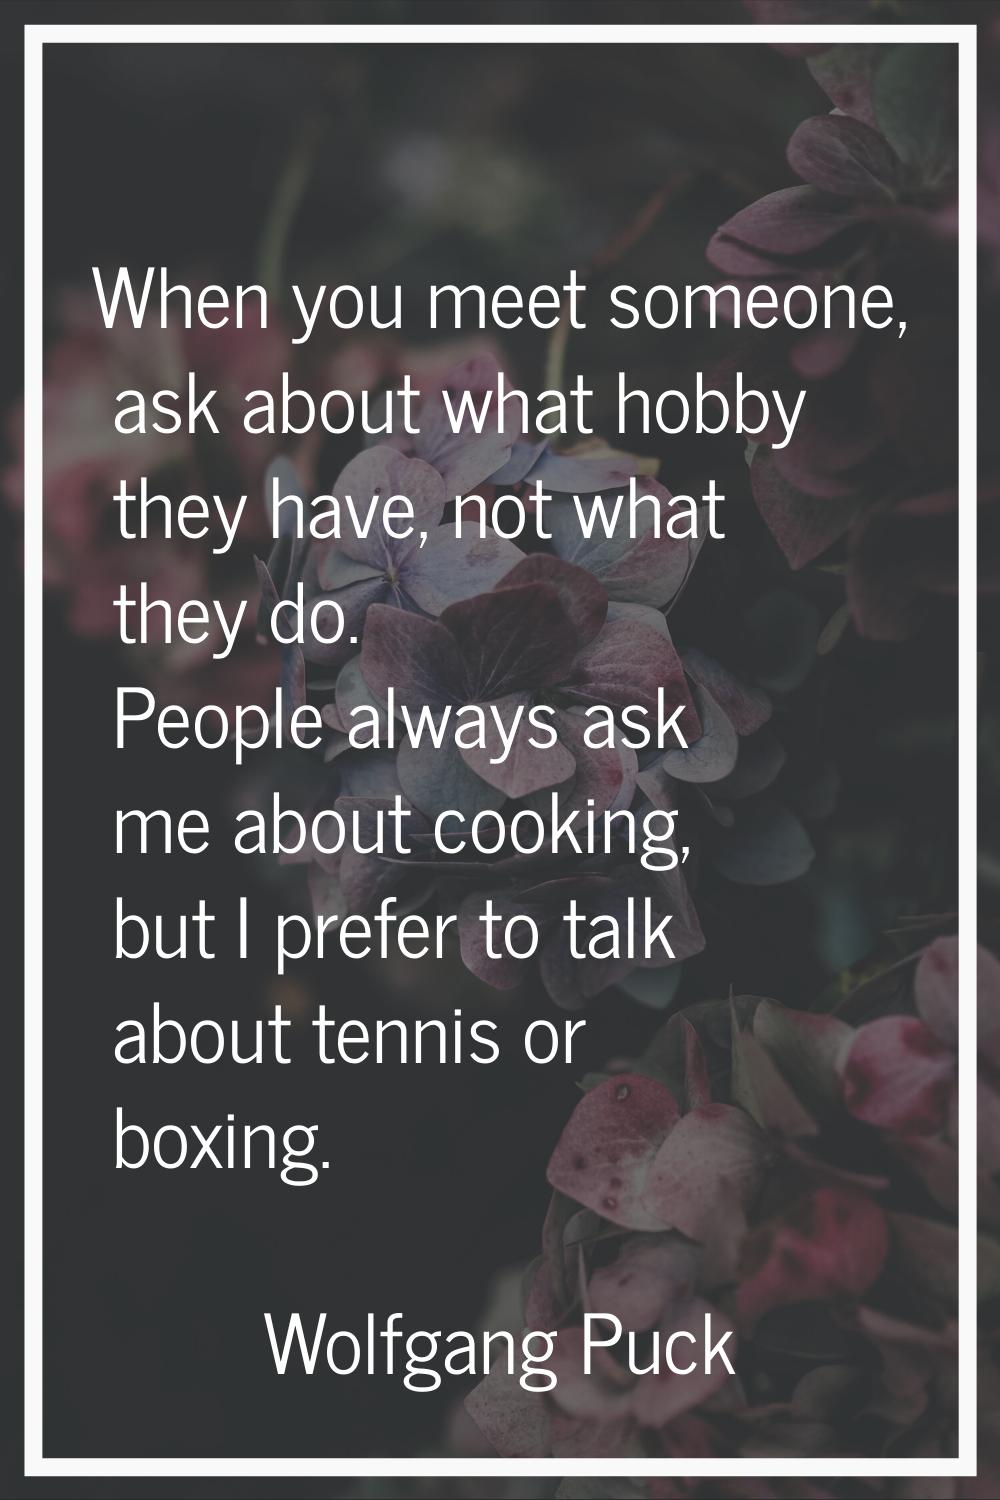 When you meet someone, ask about what hobby they have, not what they do. People always ask me about